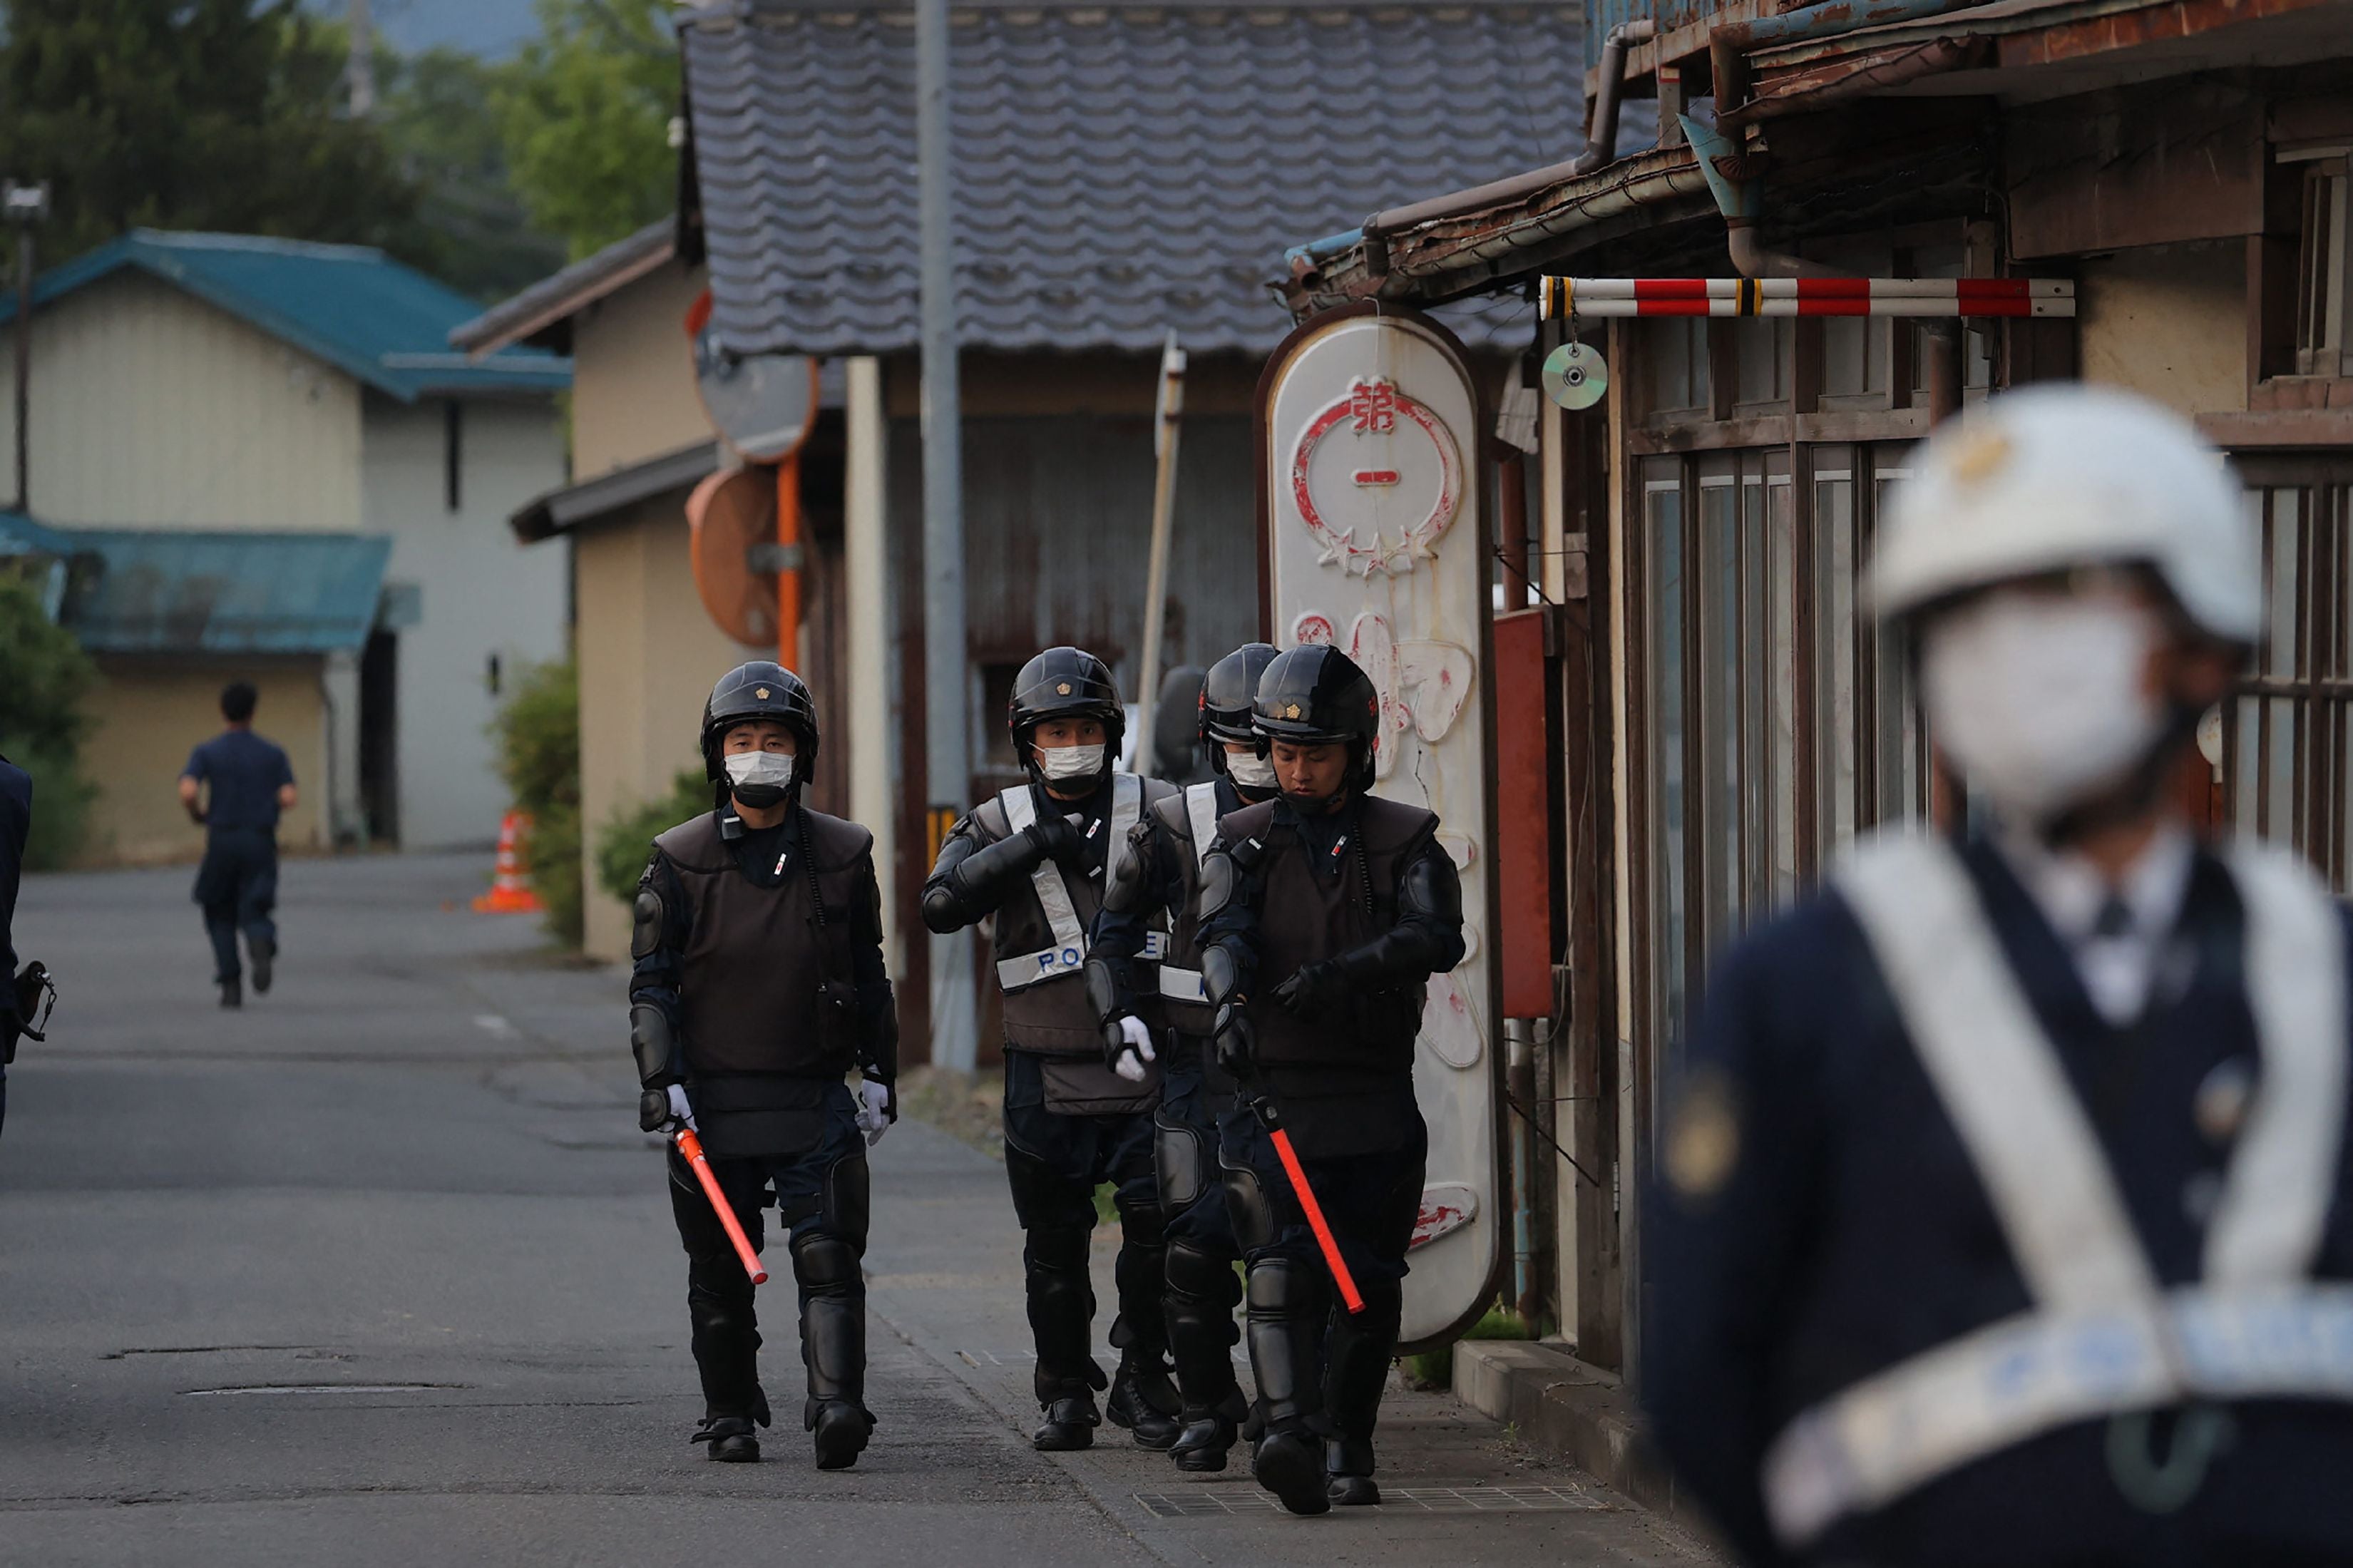 Japanese police officers are seen near the scene of a standoff where a suspect was holed up inside a building